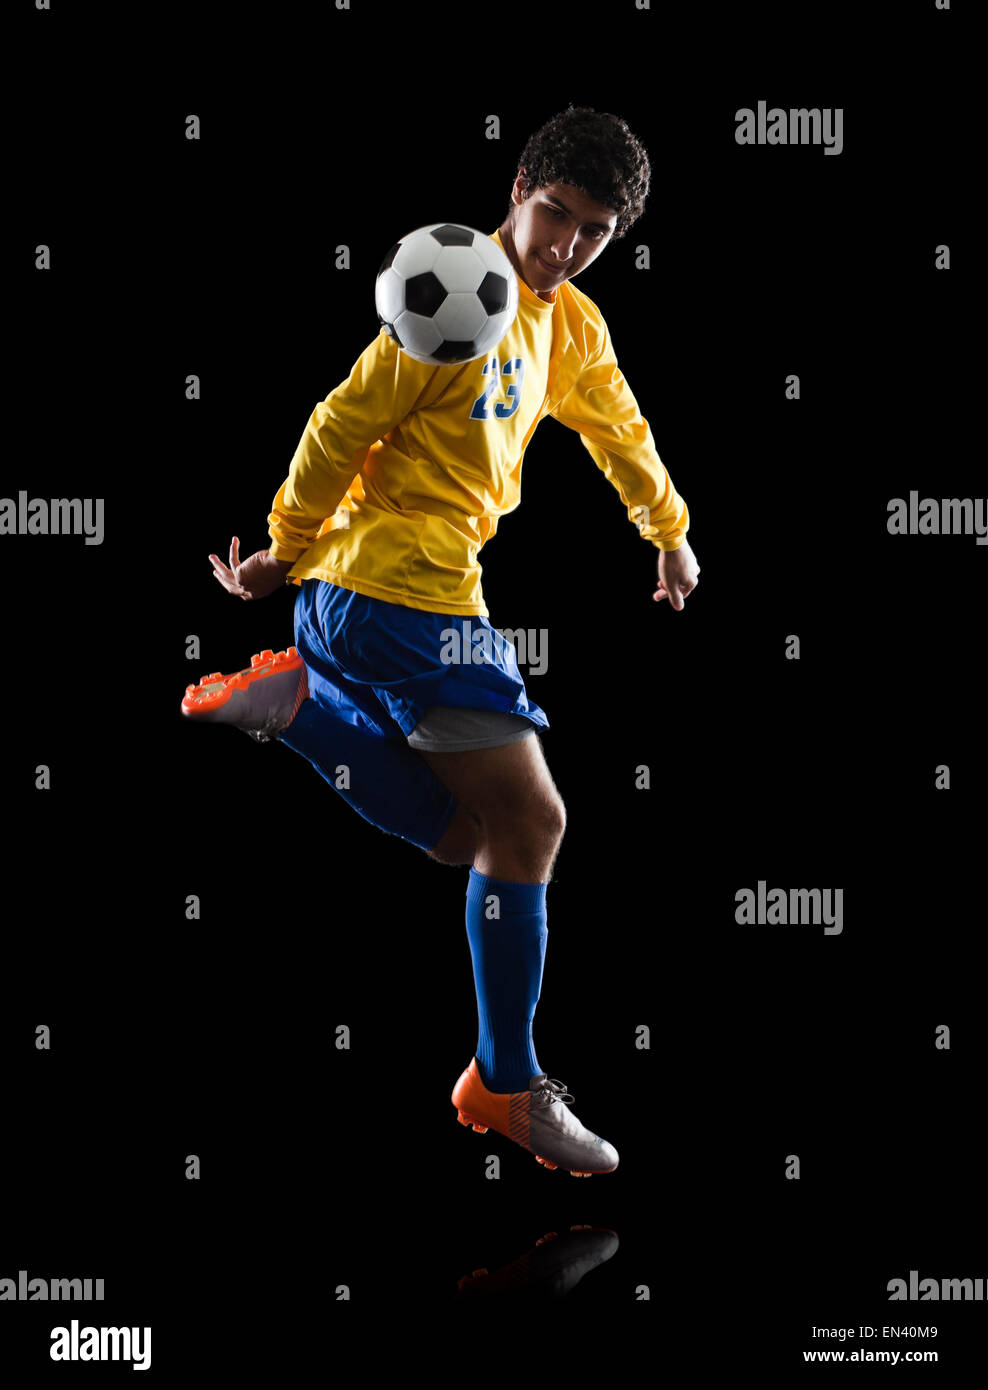 soccer player. Stock Photo